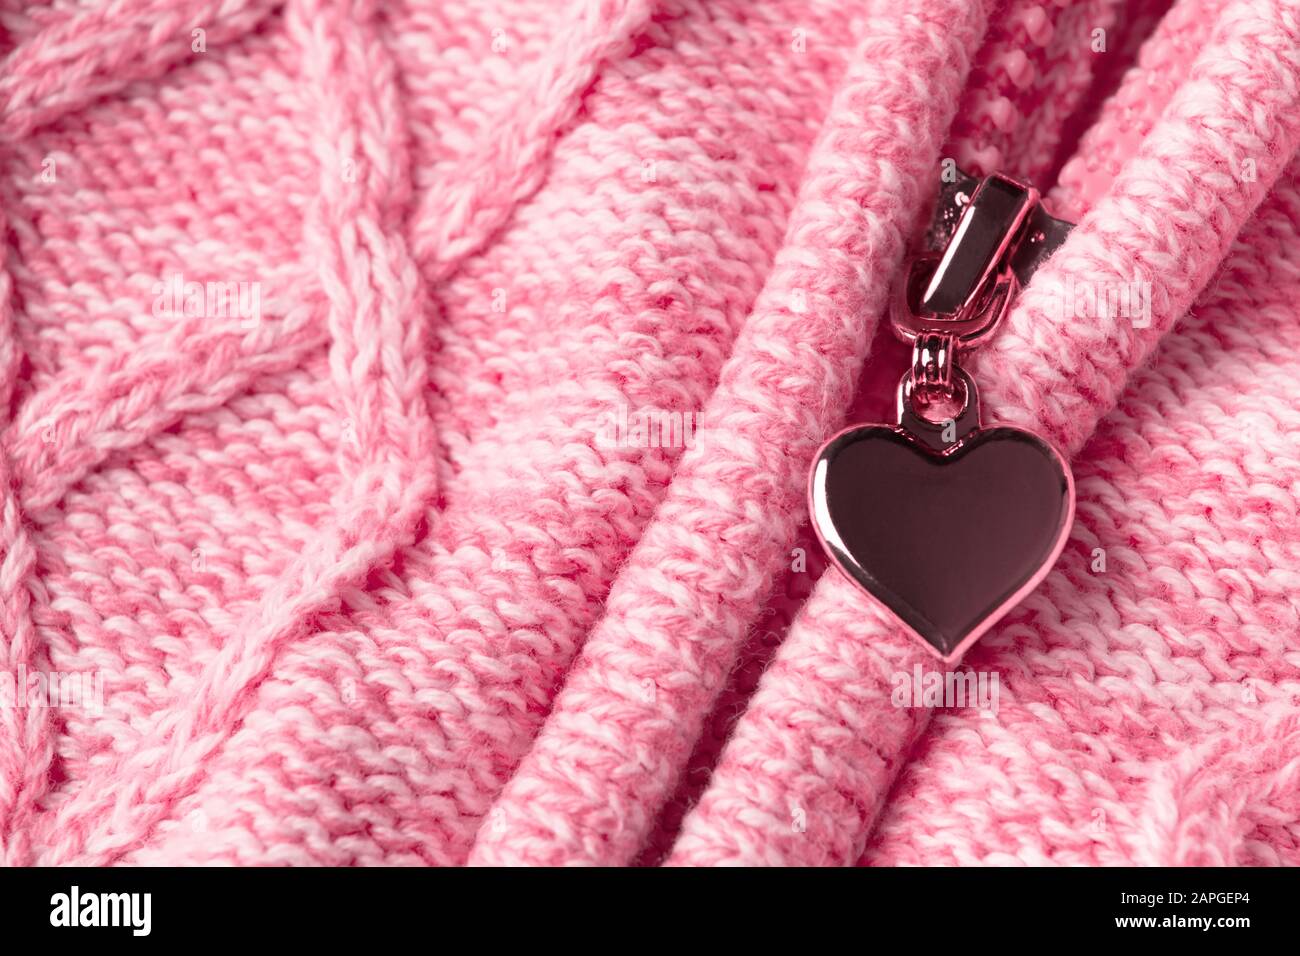 Slider with shape of heart in zipper on textile woolen pink clothes. Valentine's day material background. Love concept. Abstract love sign Stock Photo